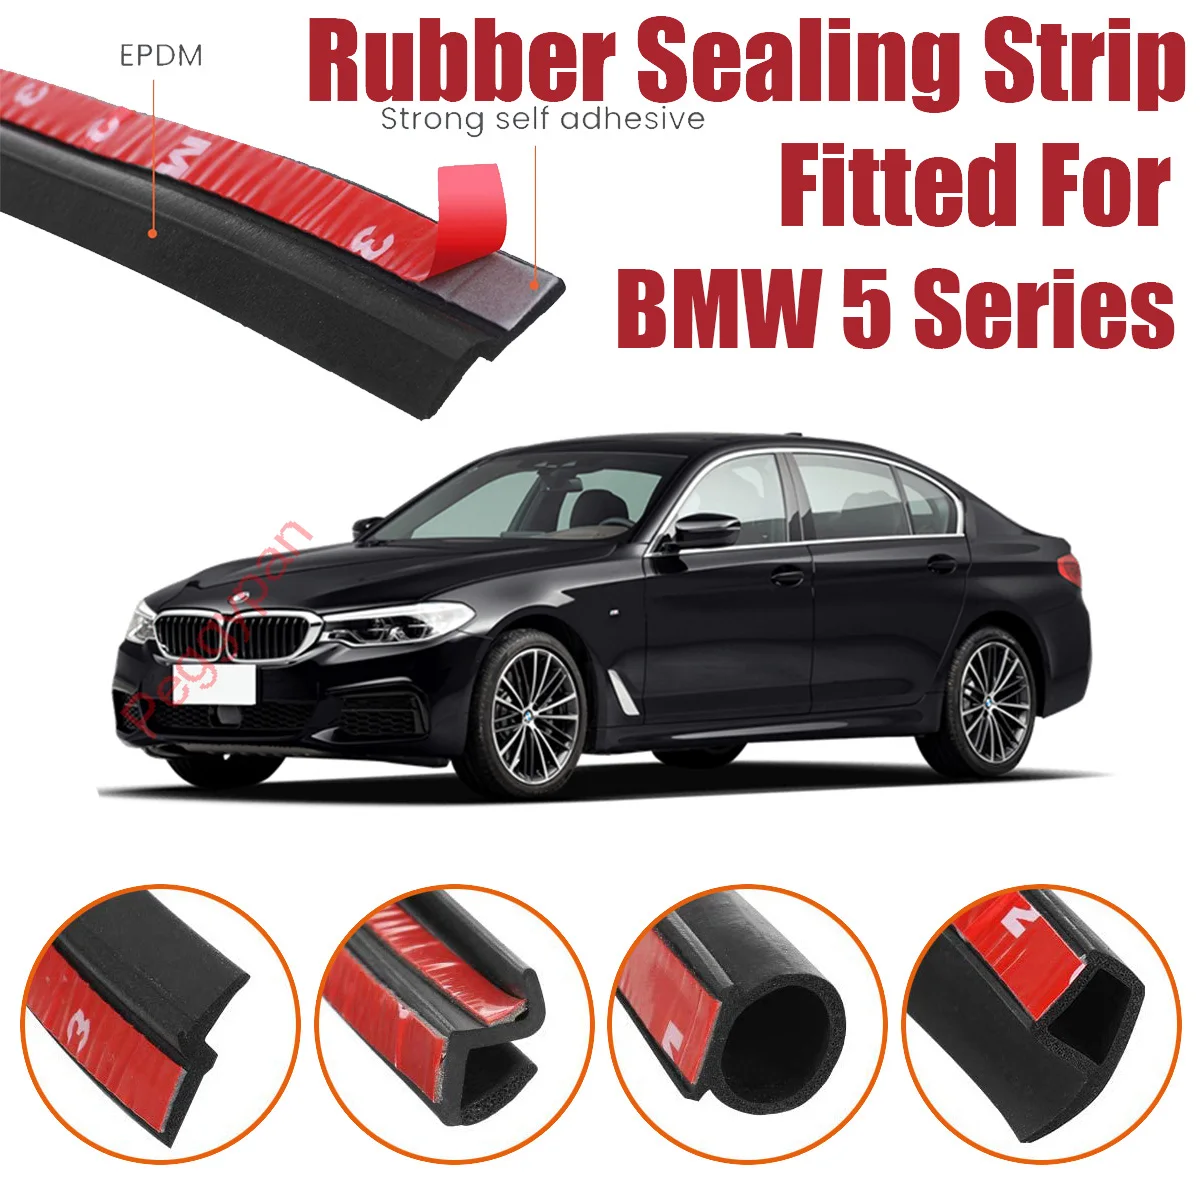 door-seal-strip-kit-self-adhesive-window-engine-cover-soundproof-rubber-weather-draft-wind-noise-reduction-fit-for-bmw-5-series